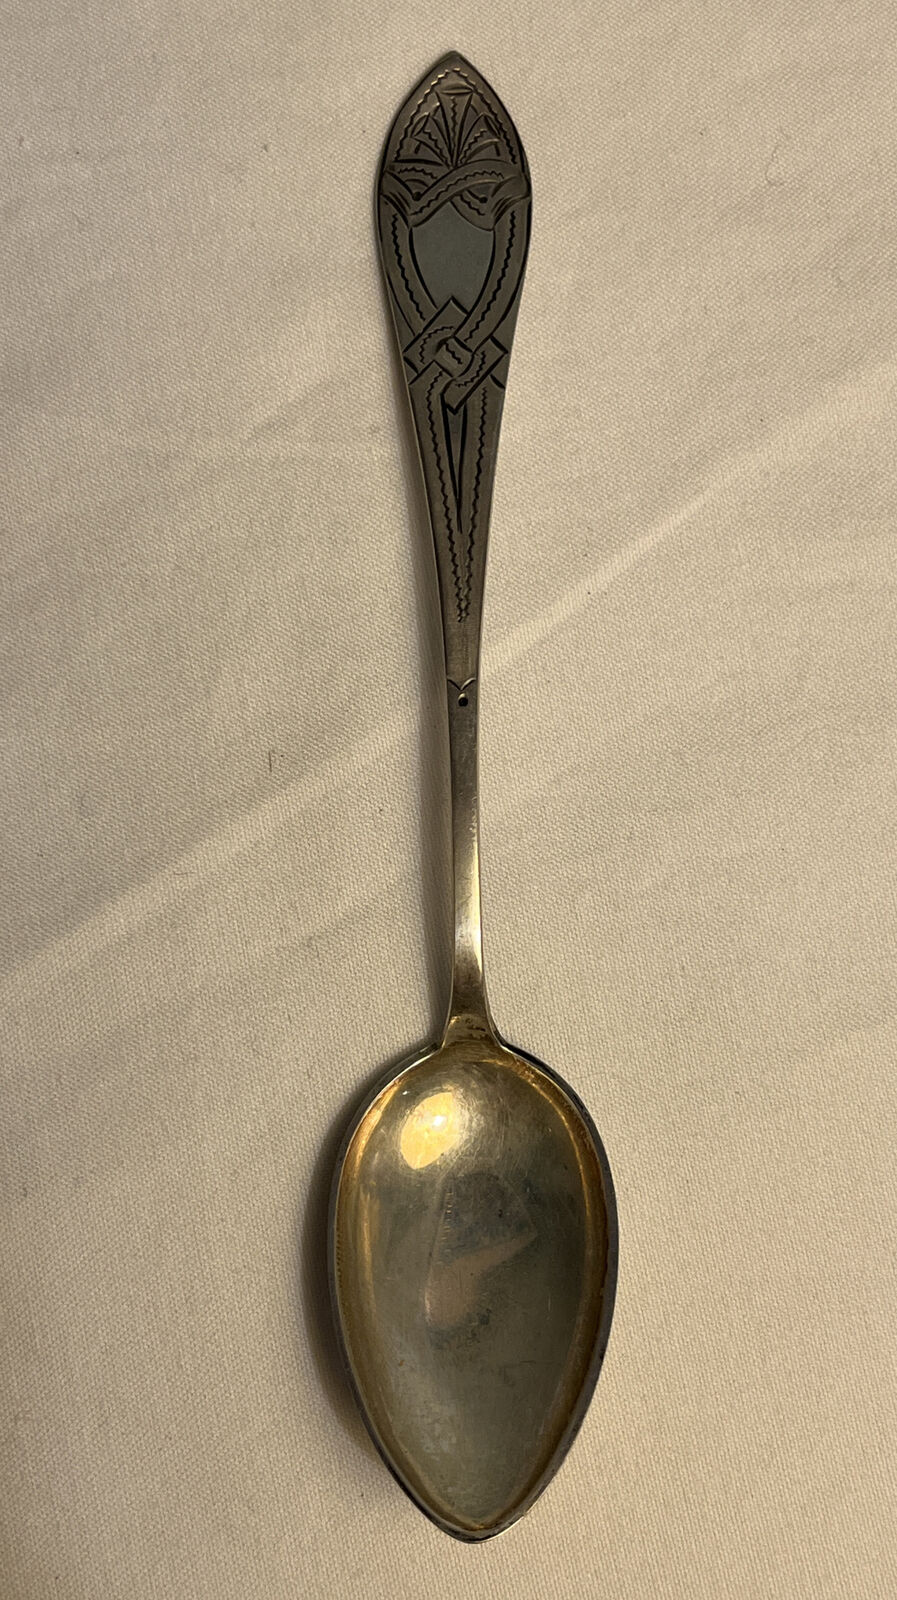 Vintage Silver Demitasse Spoon Collectible Marked 830s